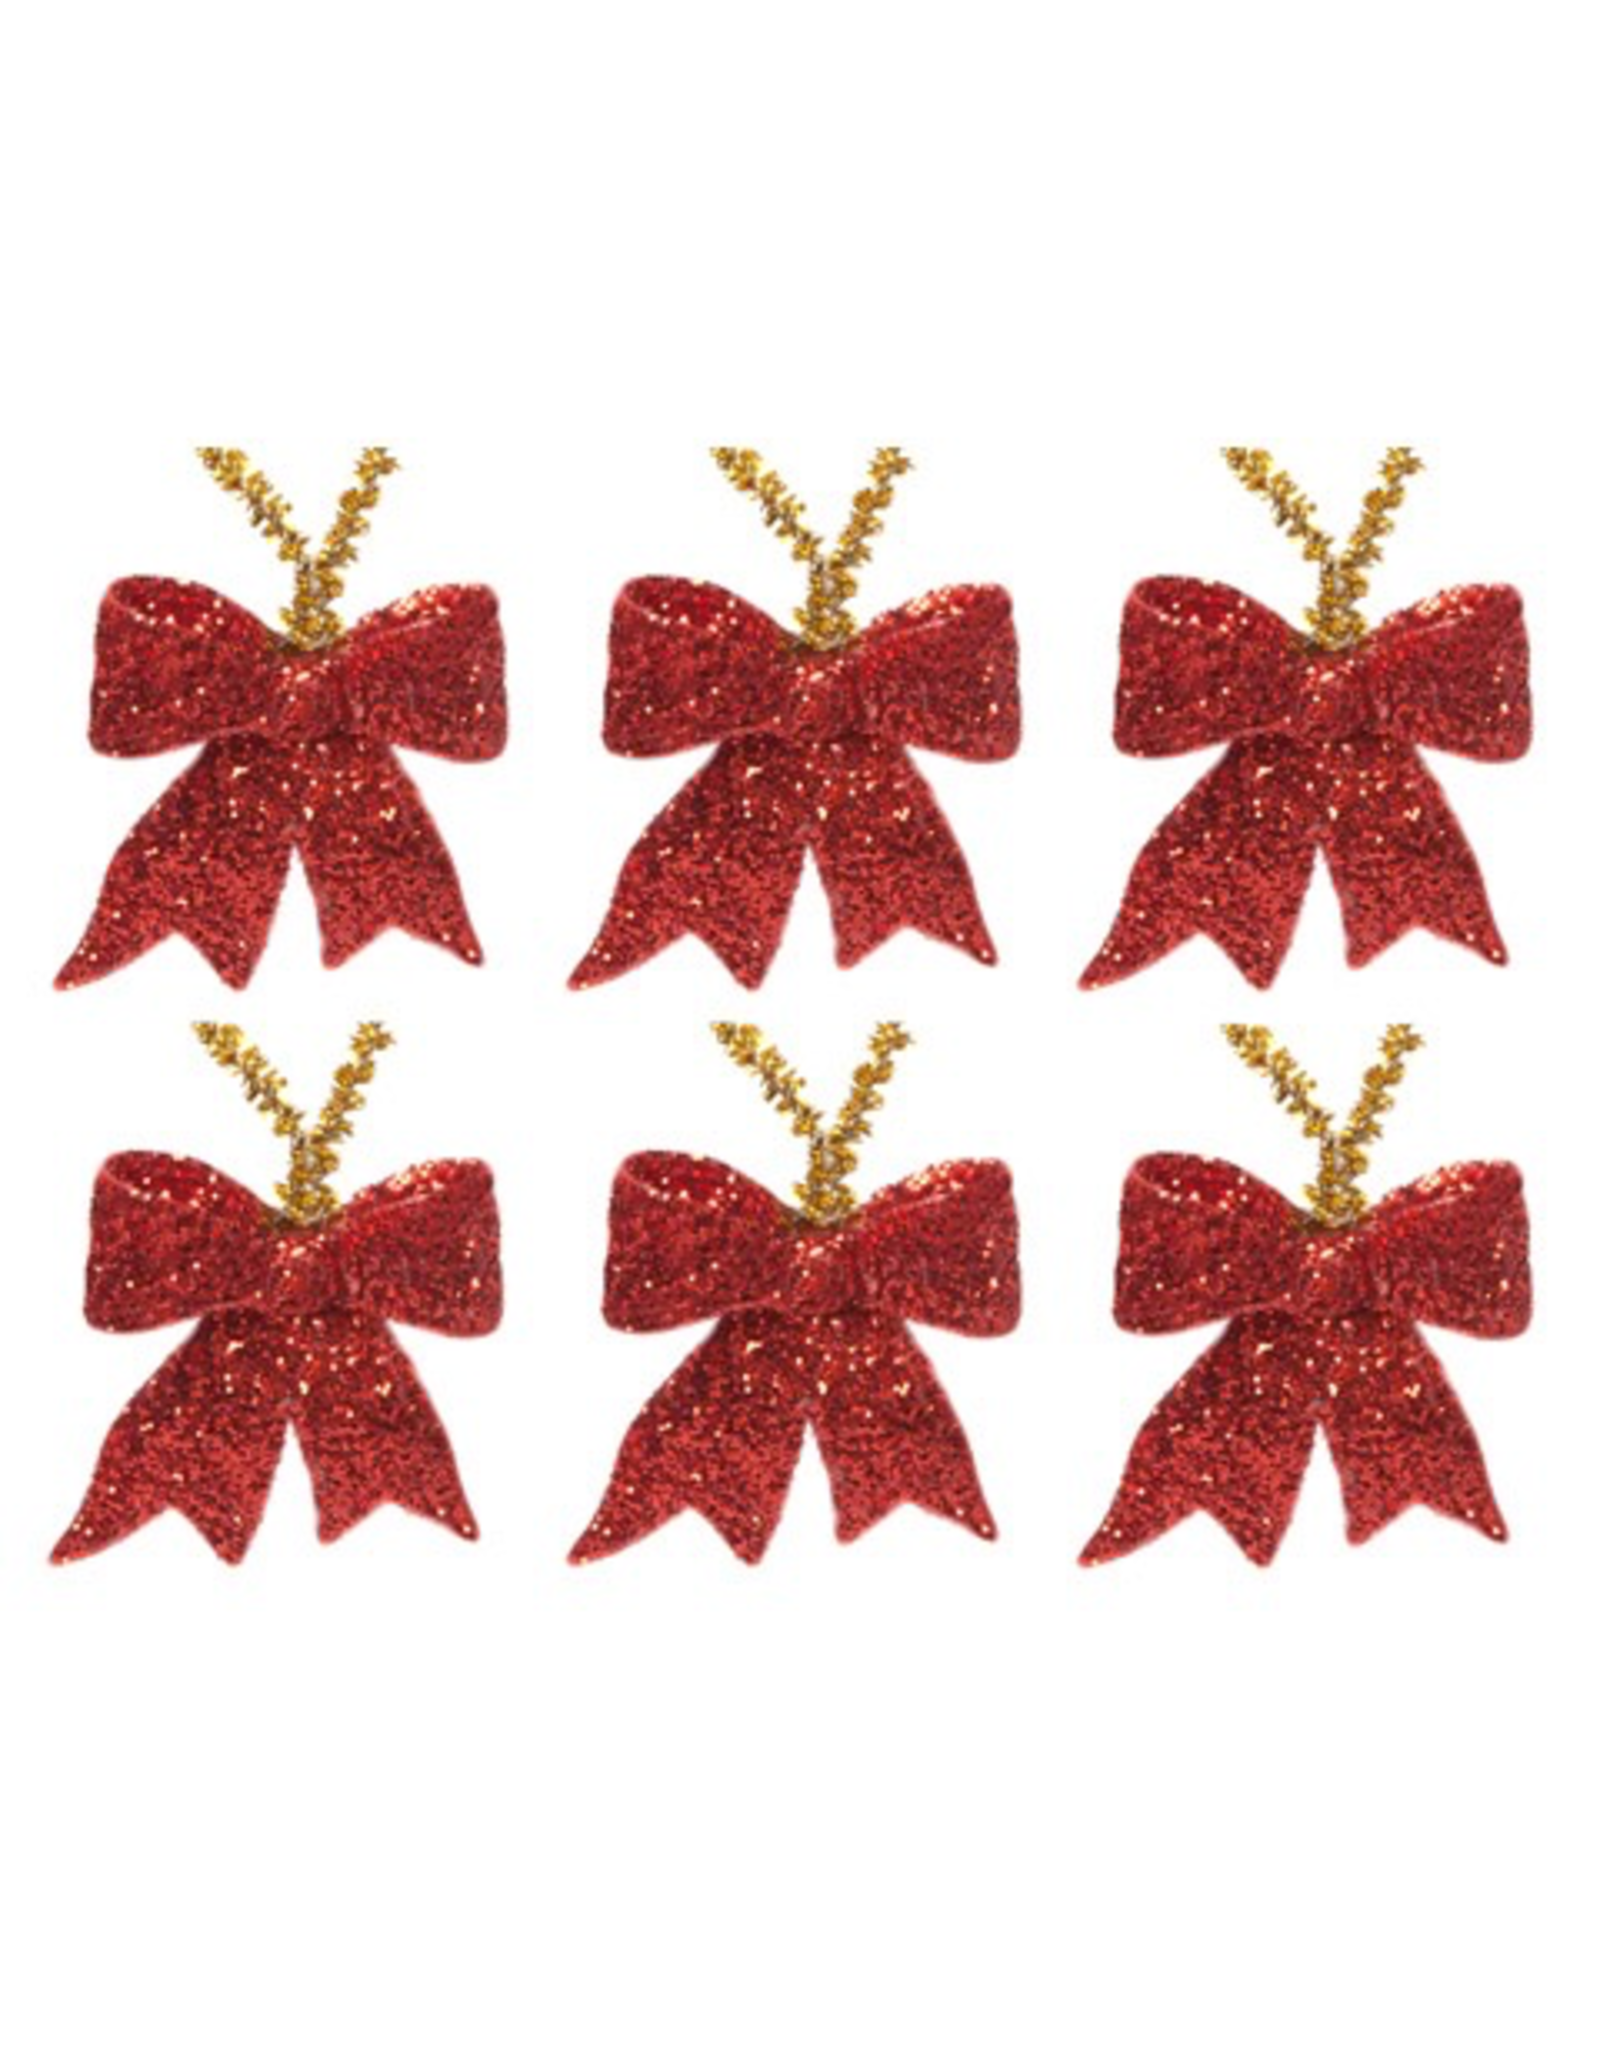 Darice Christmas Red Glittered Mini Bows Ornaments 1.25 Set of 6